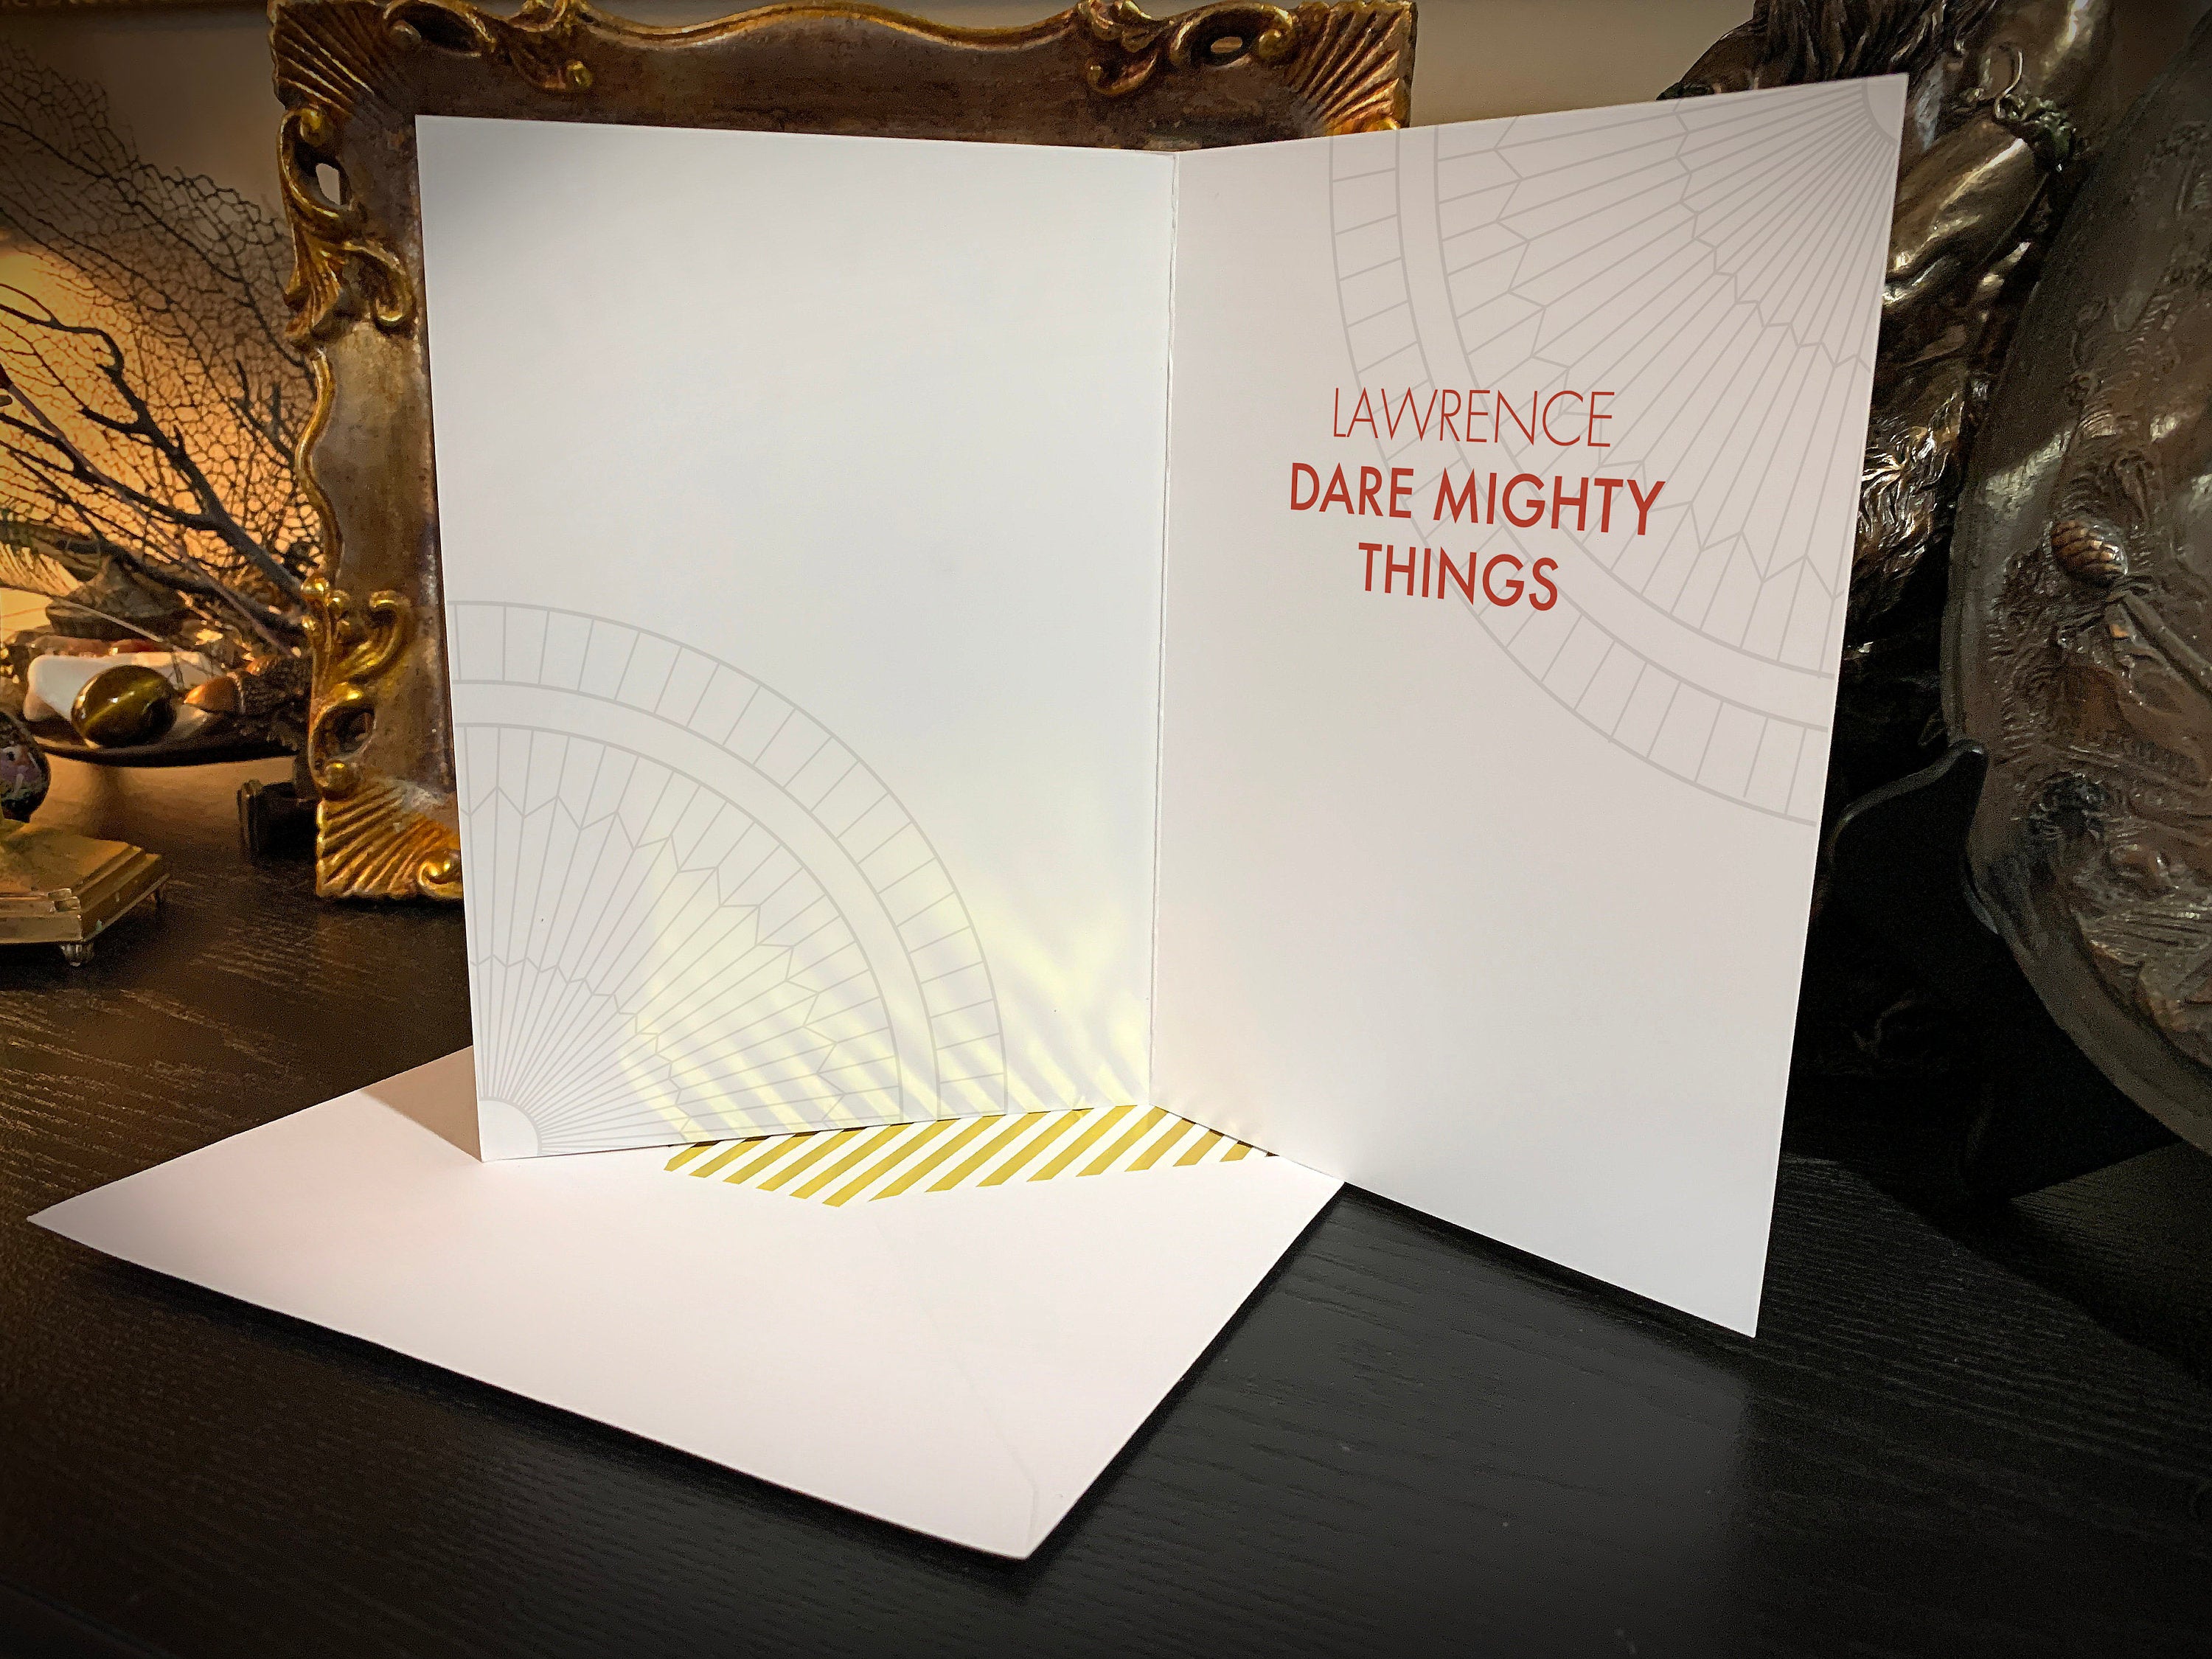 Personalized, Dare Mighty Things, Mars Perseverance Rover, Inspirational/Graduation Greeting Card with Gold Foil Envelope, 1 Card/Envelope